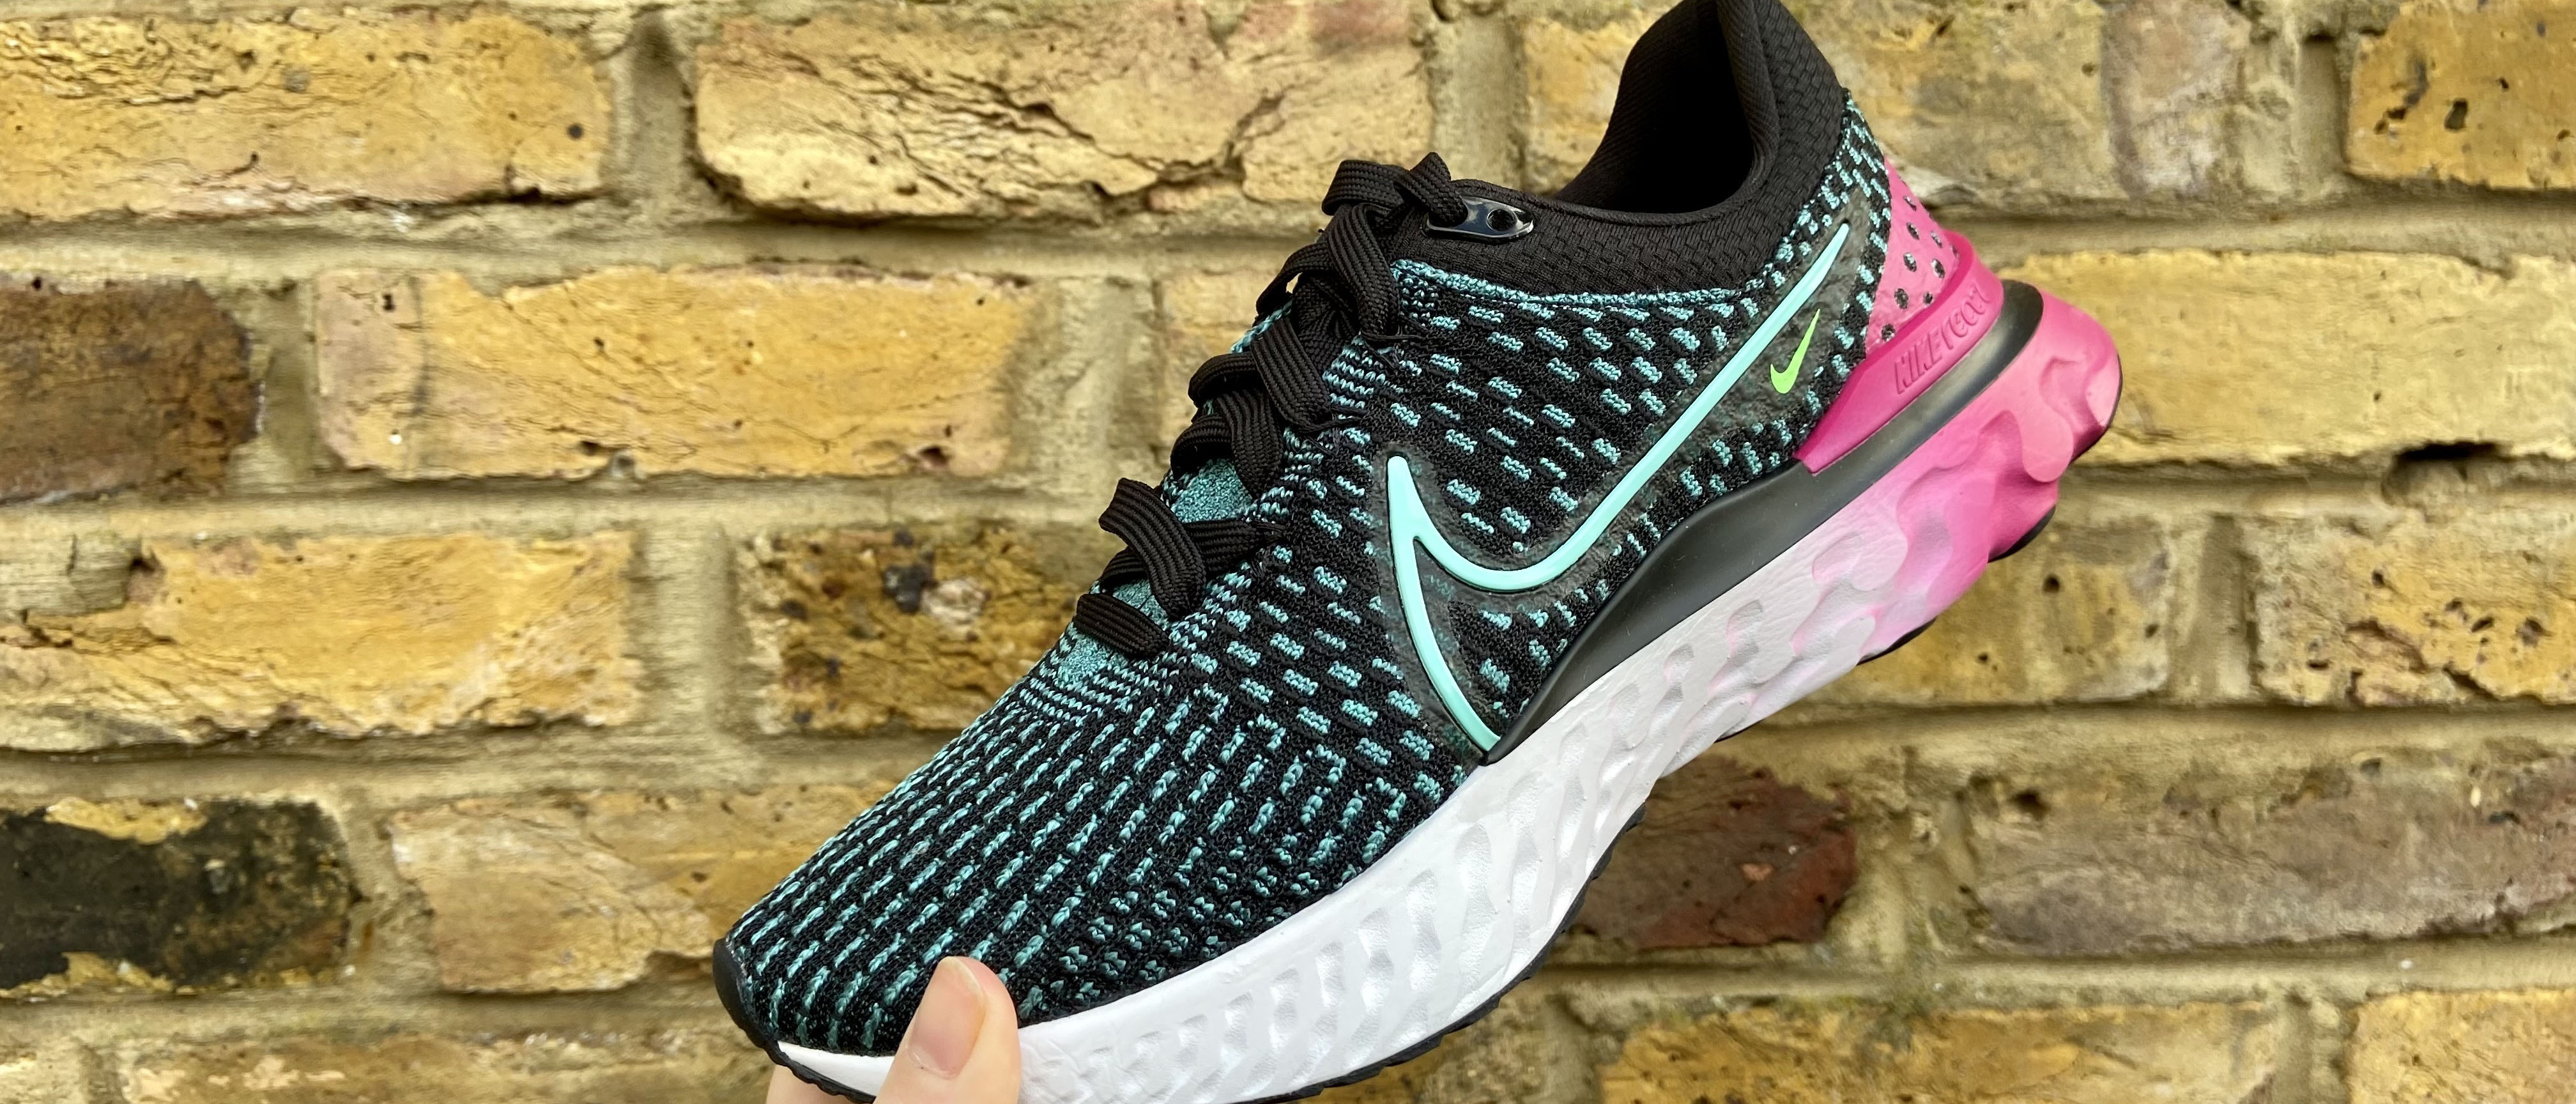 Nike React Infinity Flyknit review | Tom's Guide